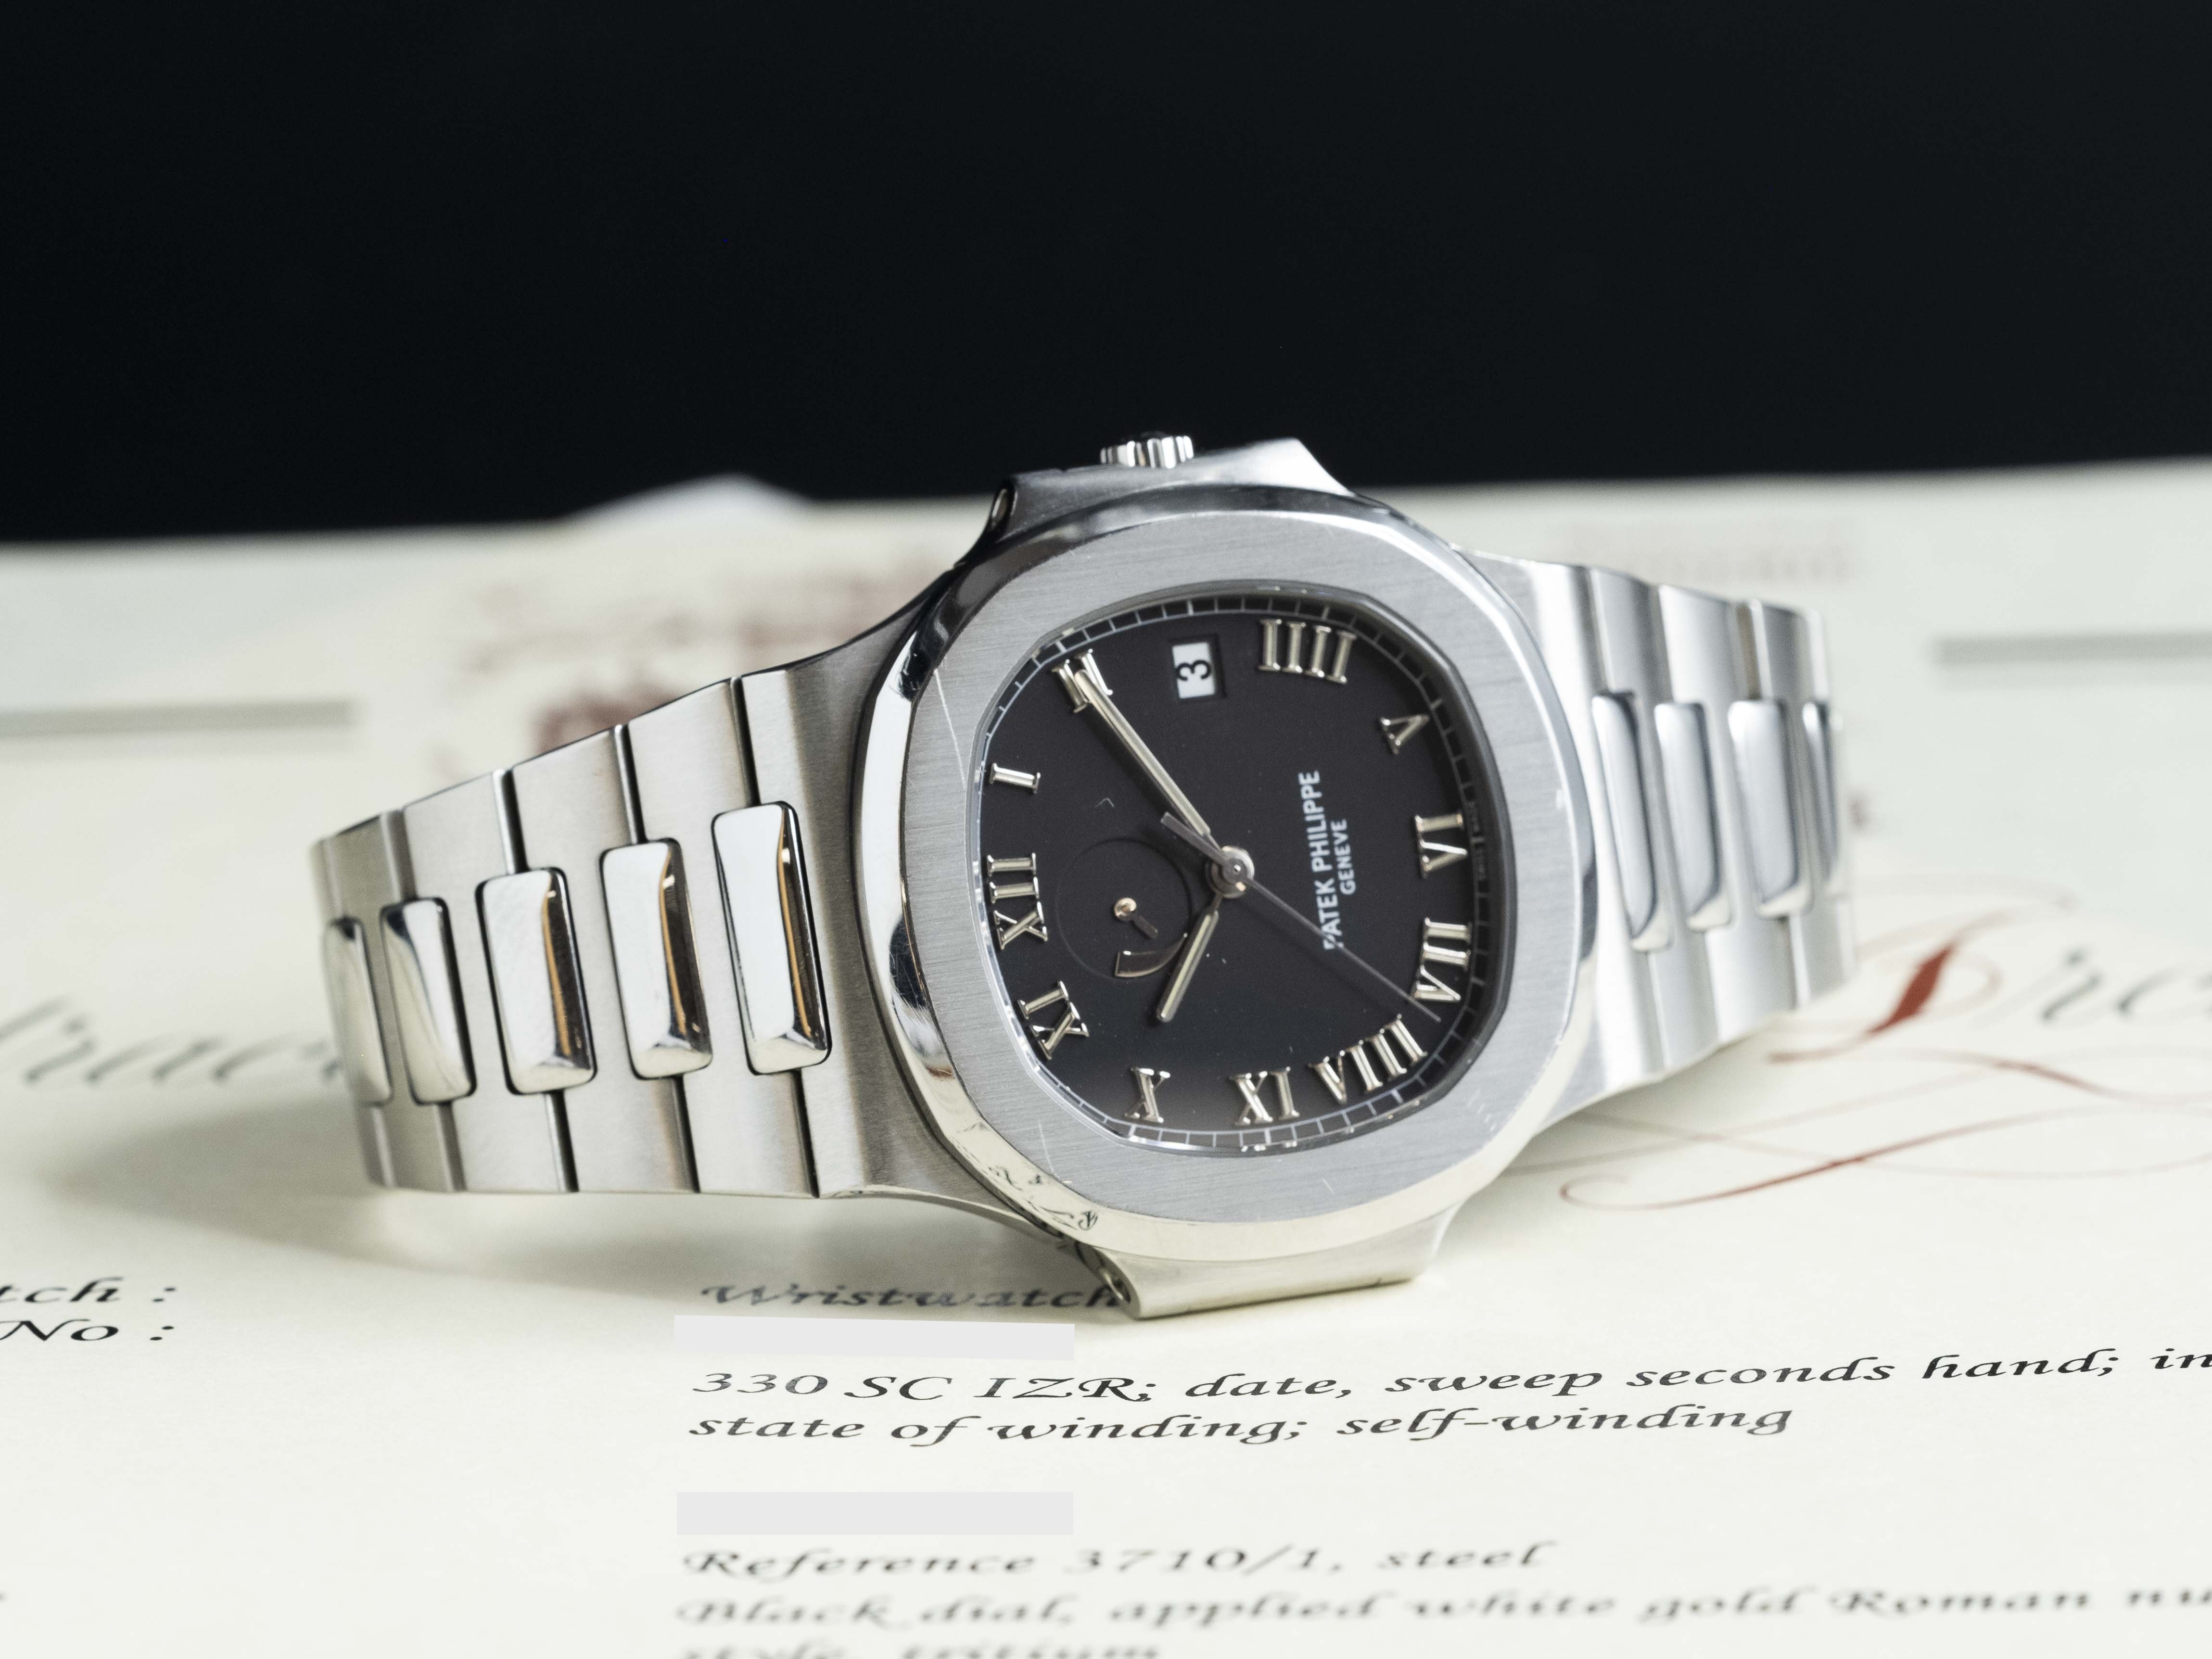 A rare and collectable reference launched in the '90s that features a power reserve indicator - the first complication seen on the Nautilus outside of a date. 0